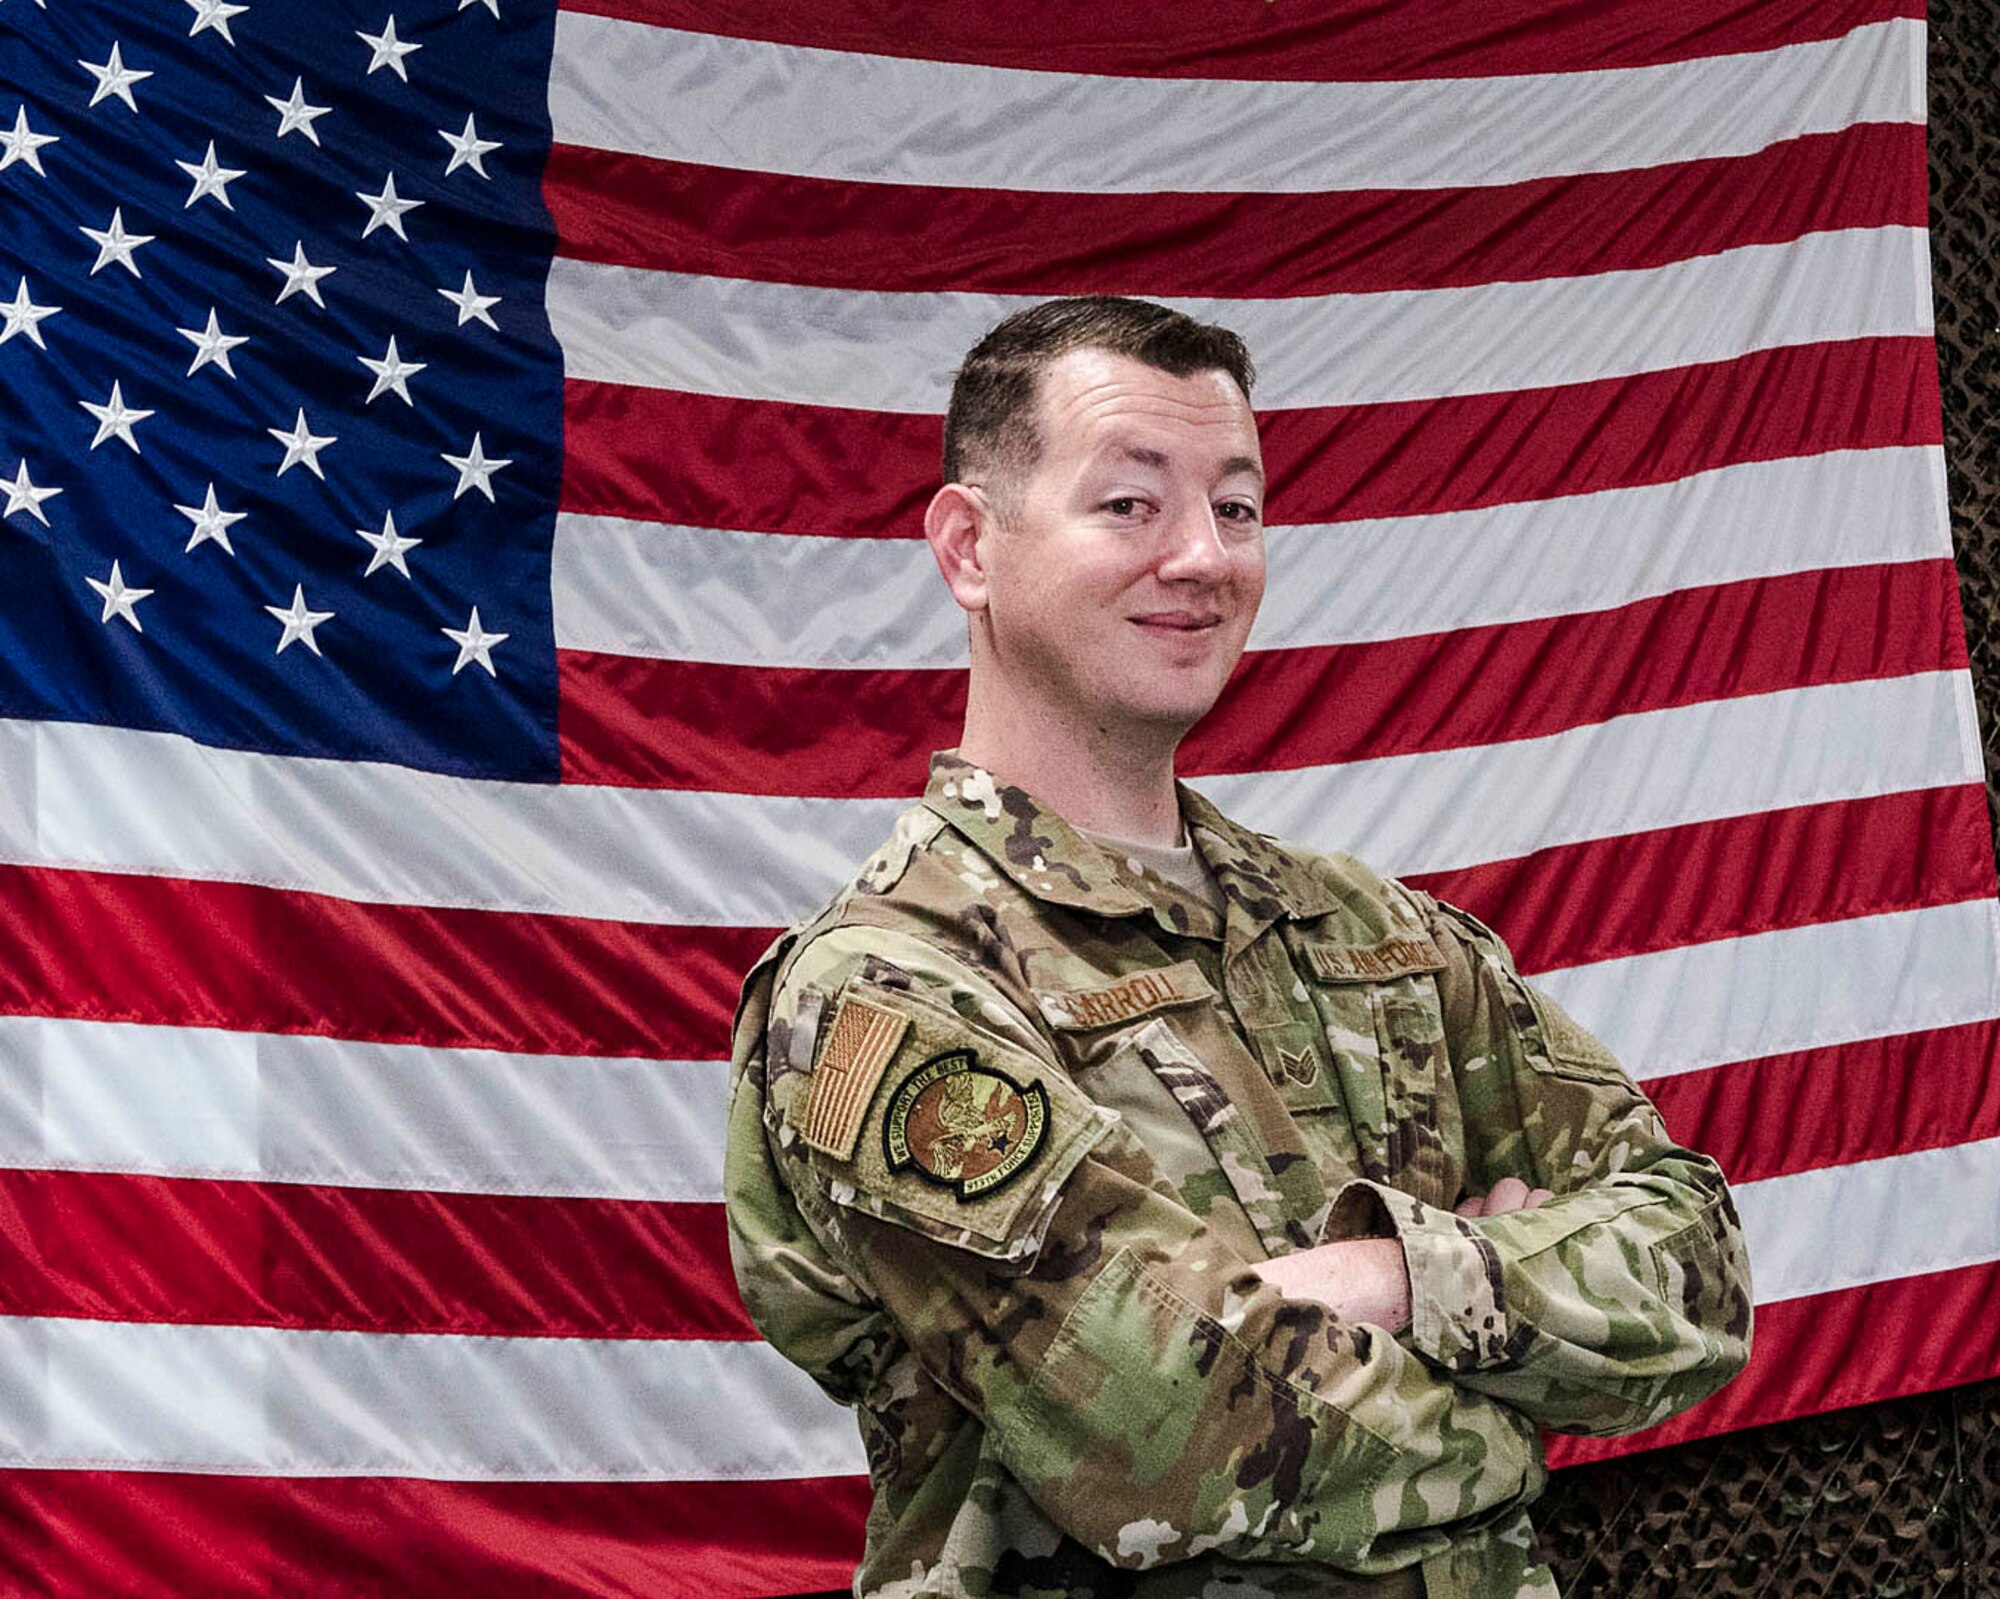 Airman poses in front of U.S. flag for Airman of the week.